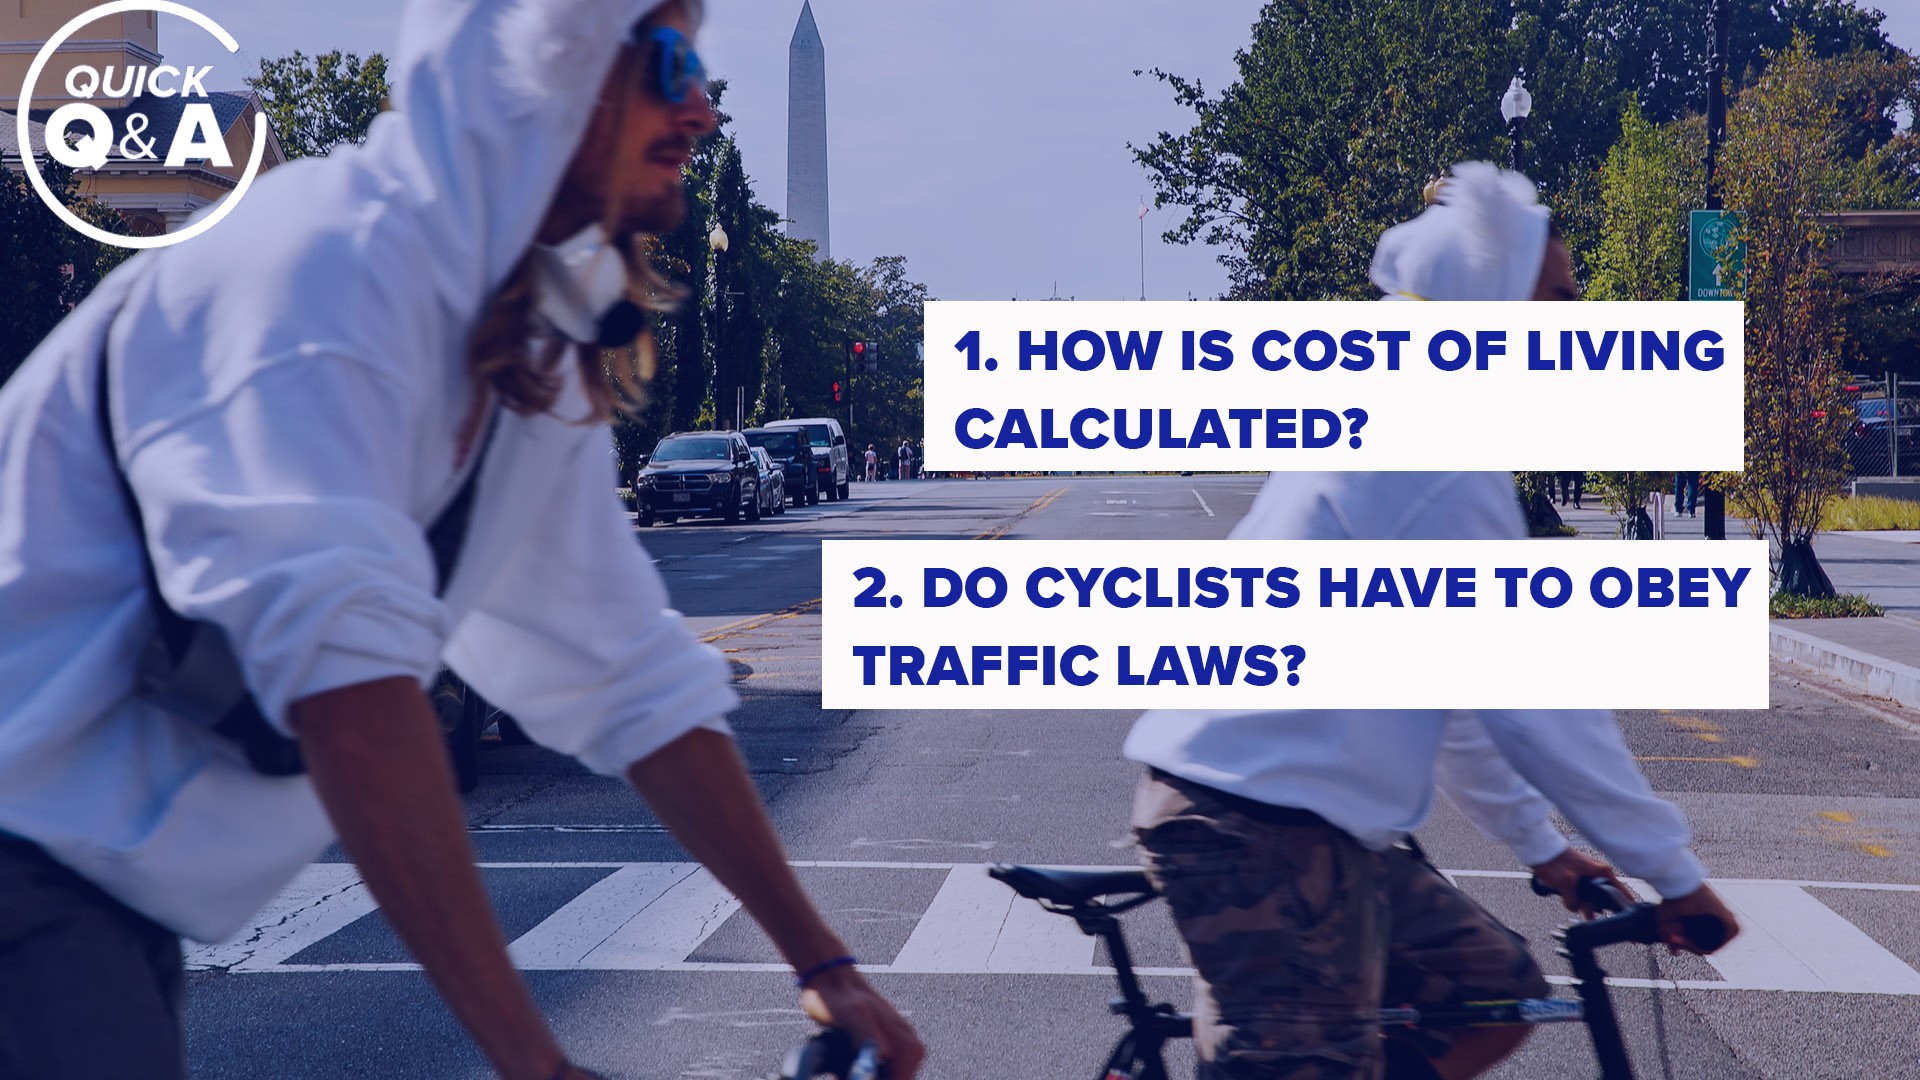 Ever wonder how cost of living is calculated...what about if cyclists have to obey the rules of the road like cars? We've got answers to your questions...quickly!